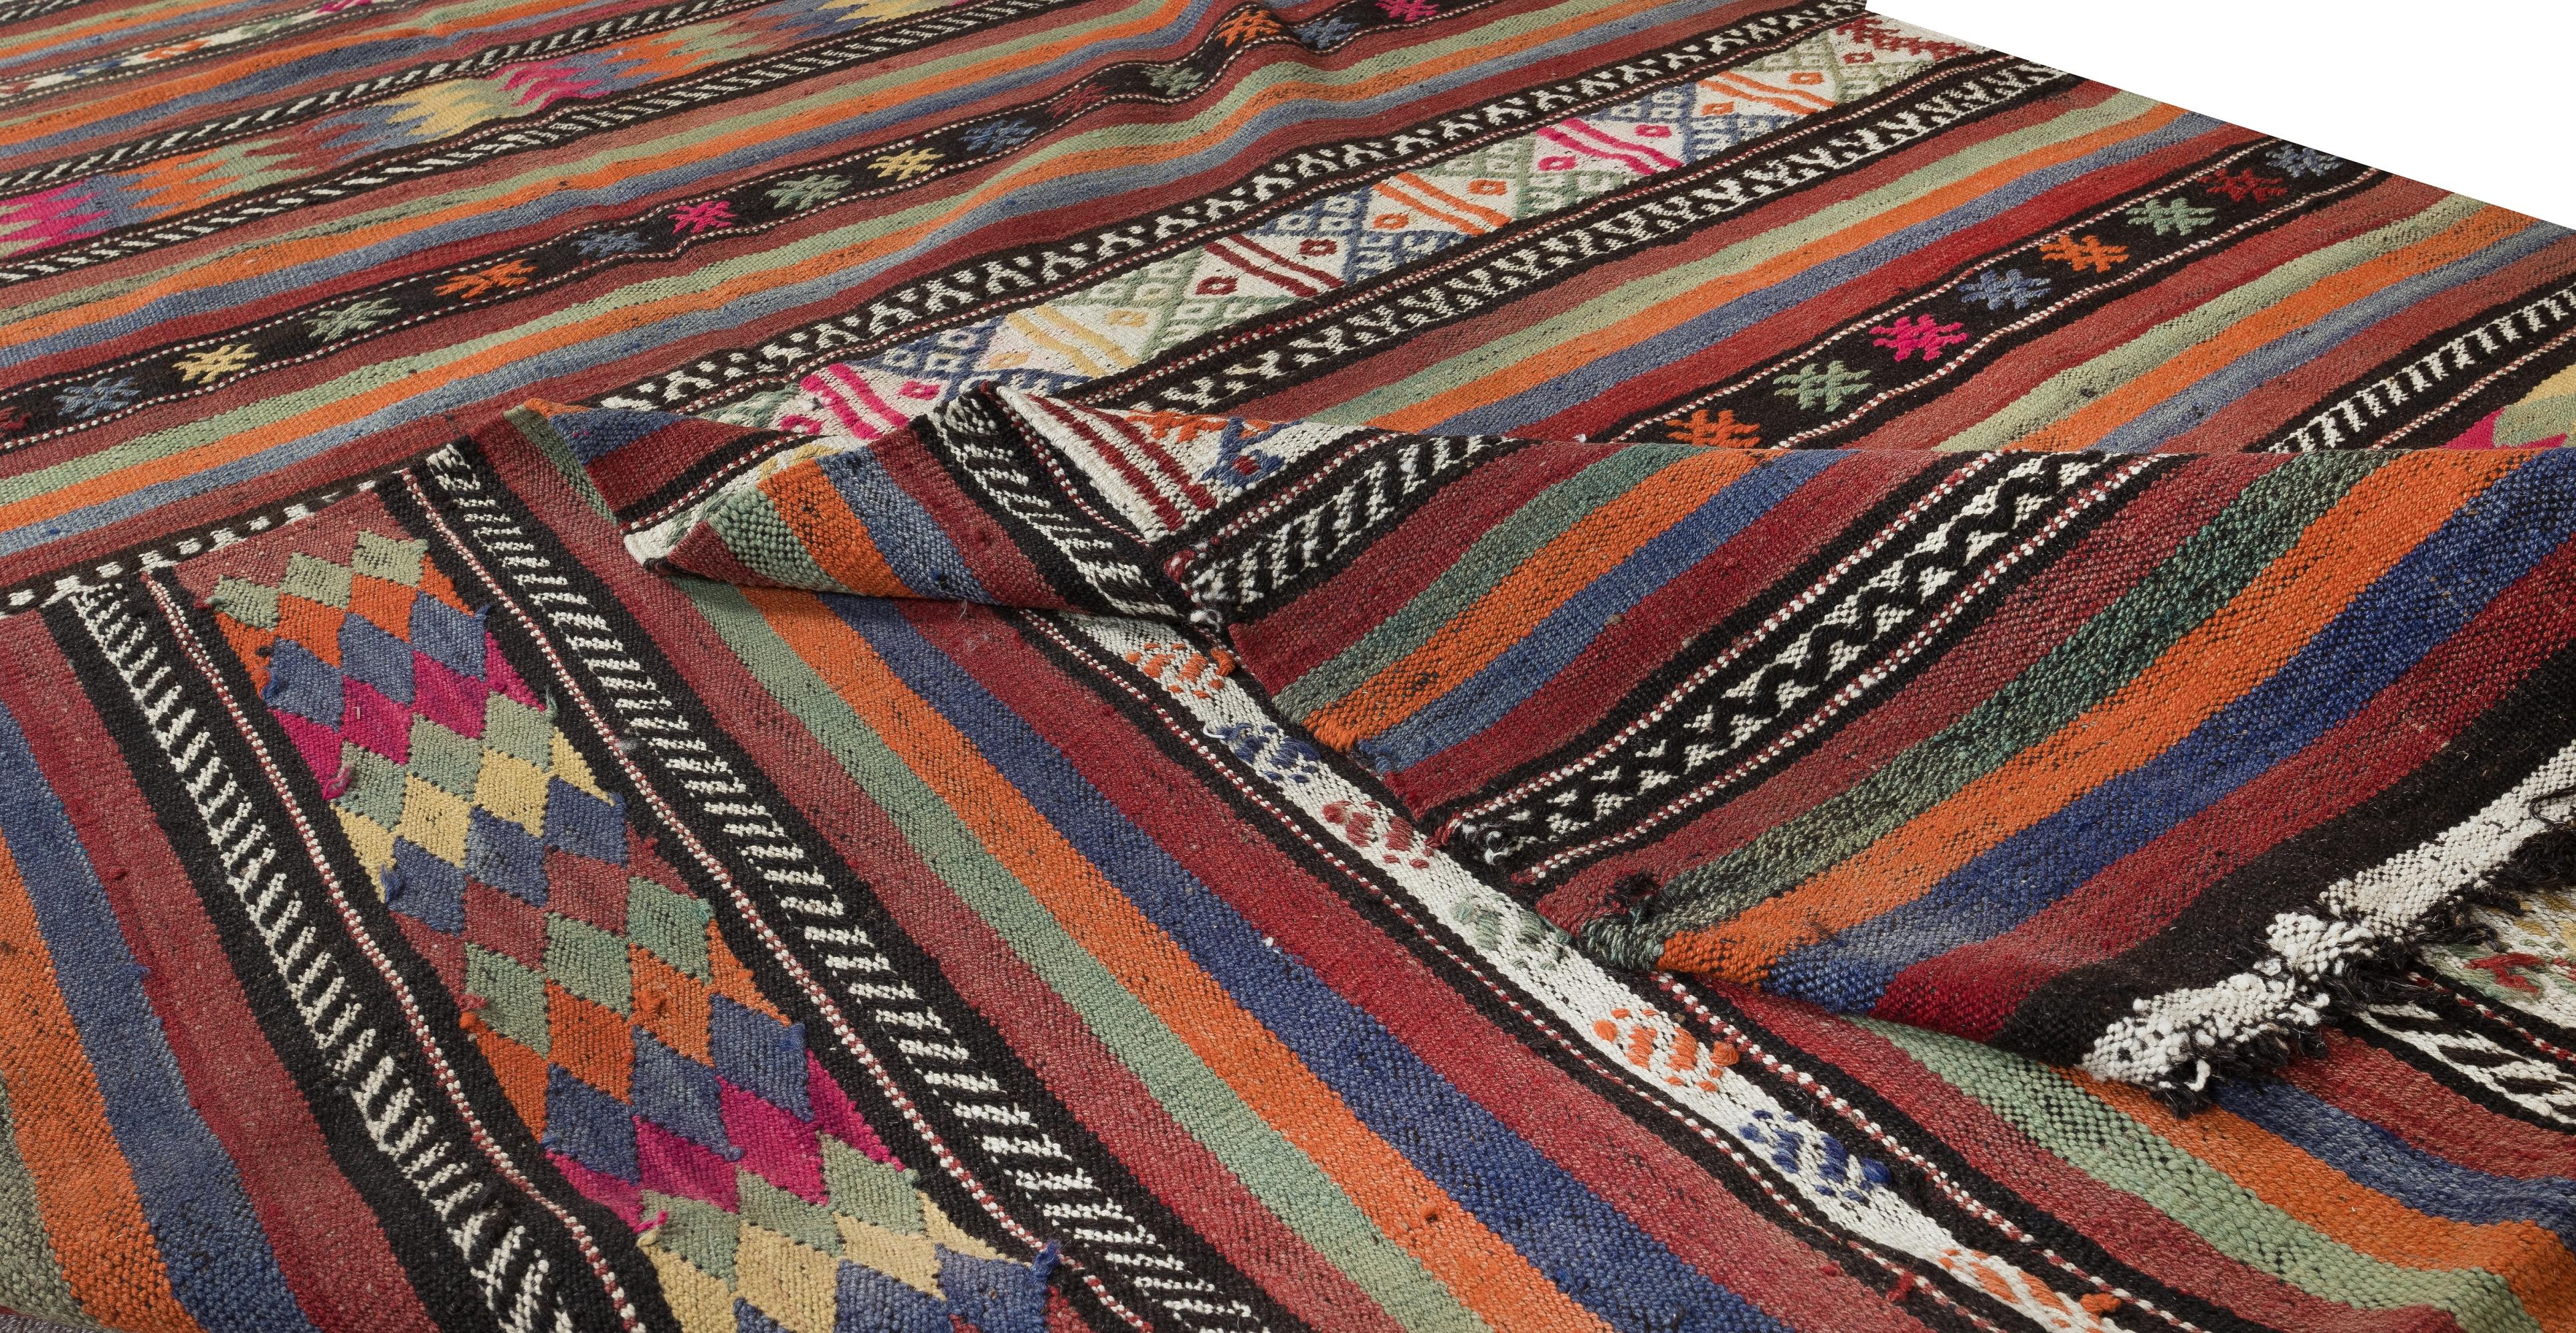 5.3x9.6 Ft Colorful Kilim Made of Hand-Spun Wool, Hand-Woven Turkish Striped Rug In Good Condition For Sale In Philadelphia, PA